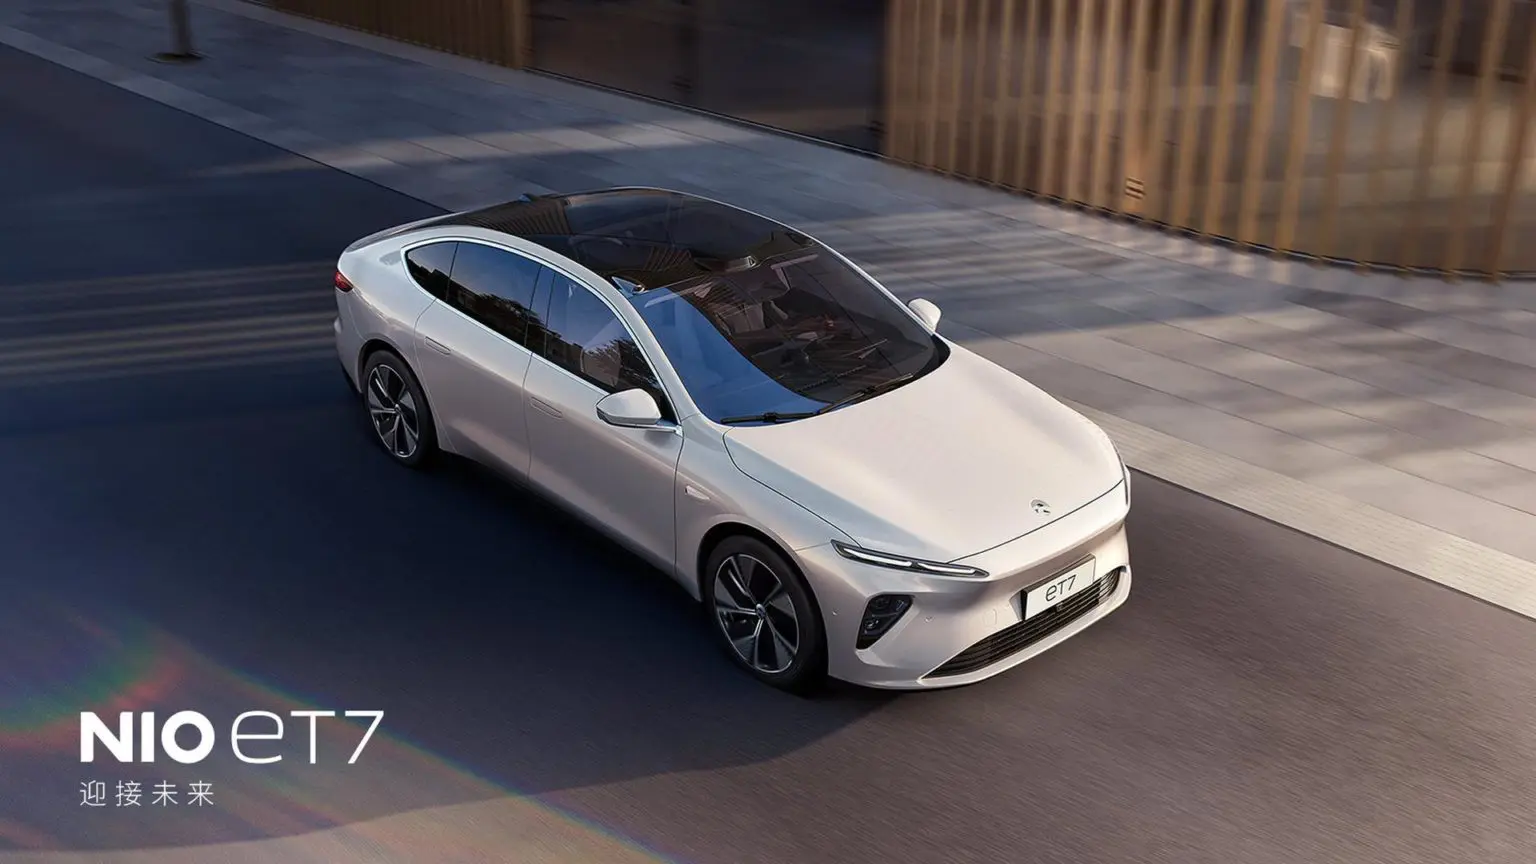 NIO: 1,000-kilometre range for the ET7 with new solid-state battery